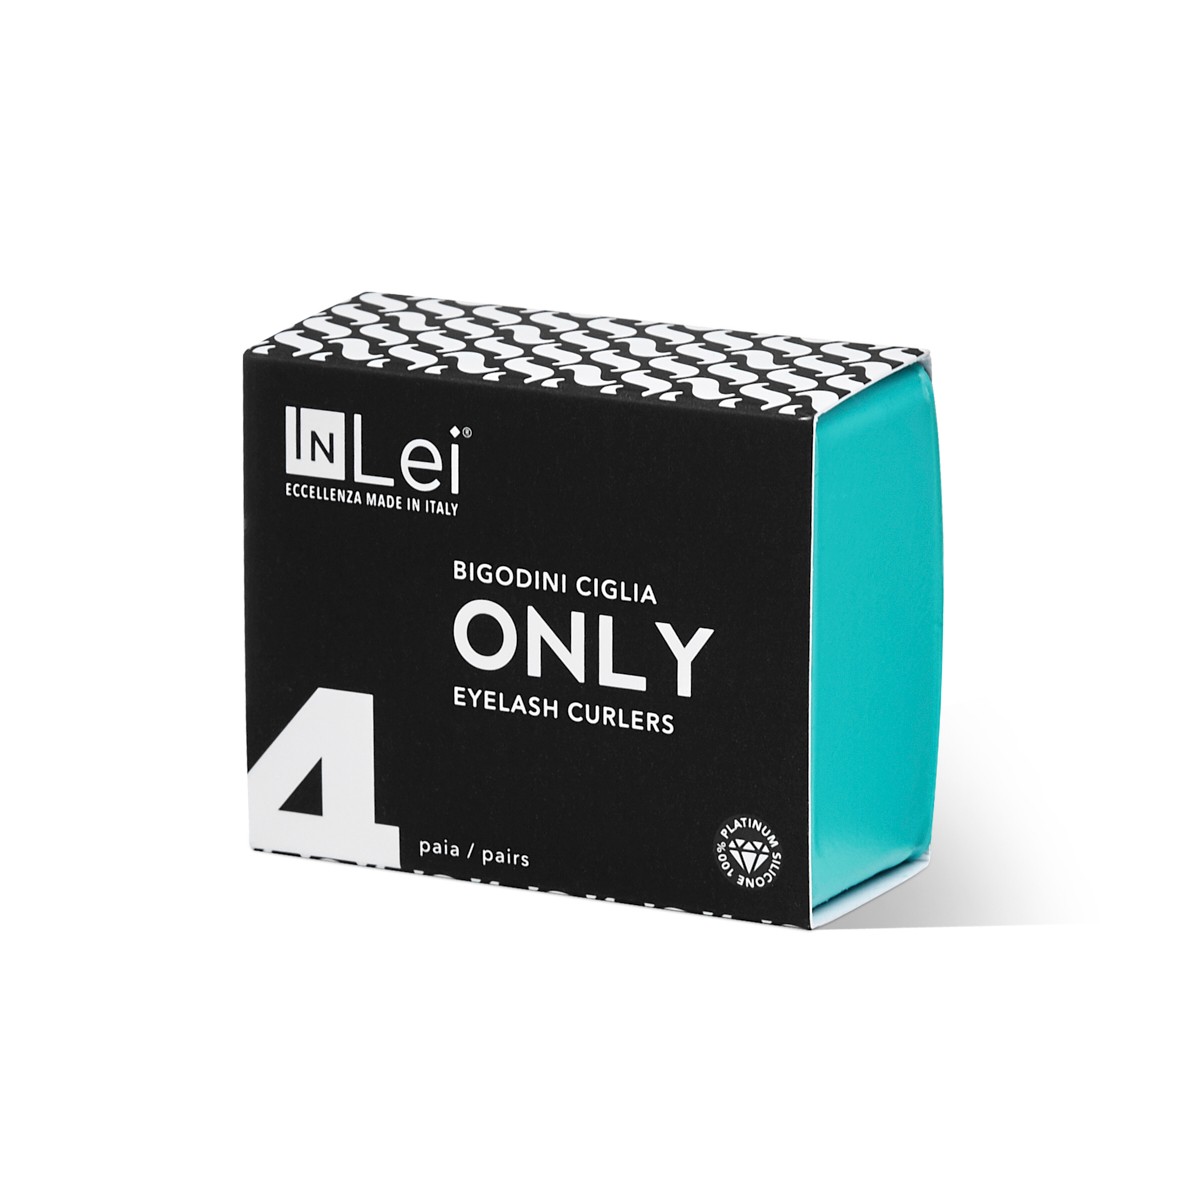 InLei® “ONLY” 4 pairs MIX Pack (S,M,L,XL)